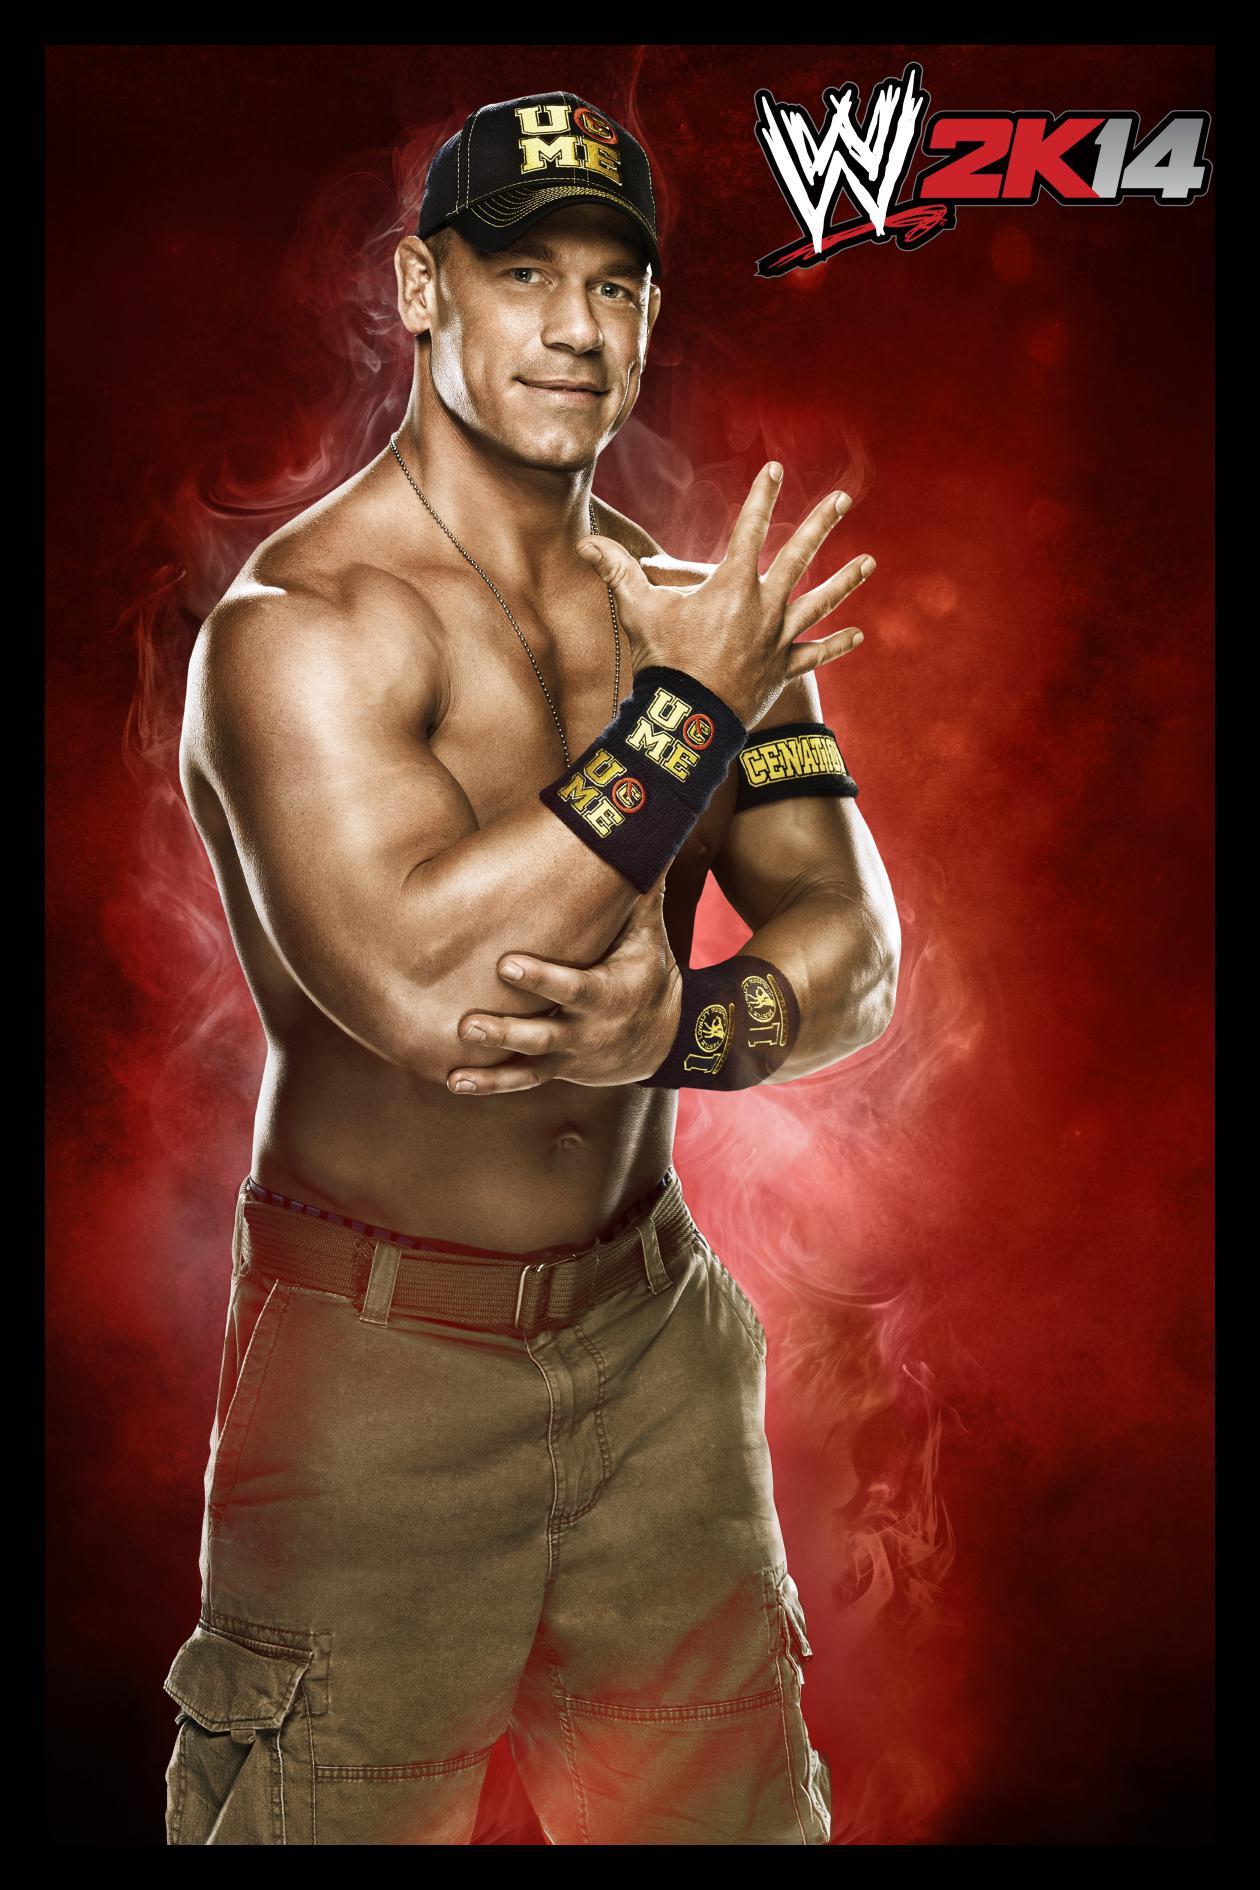 John Cena Live Wallpaper for Android Free Download. All